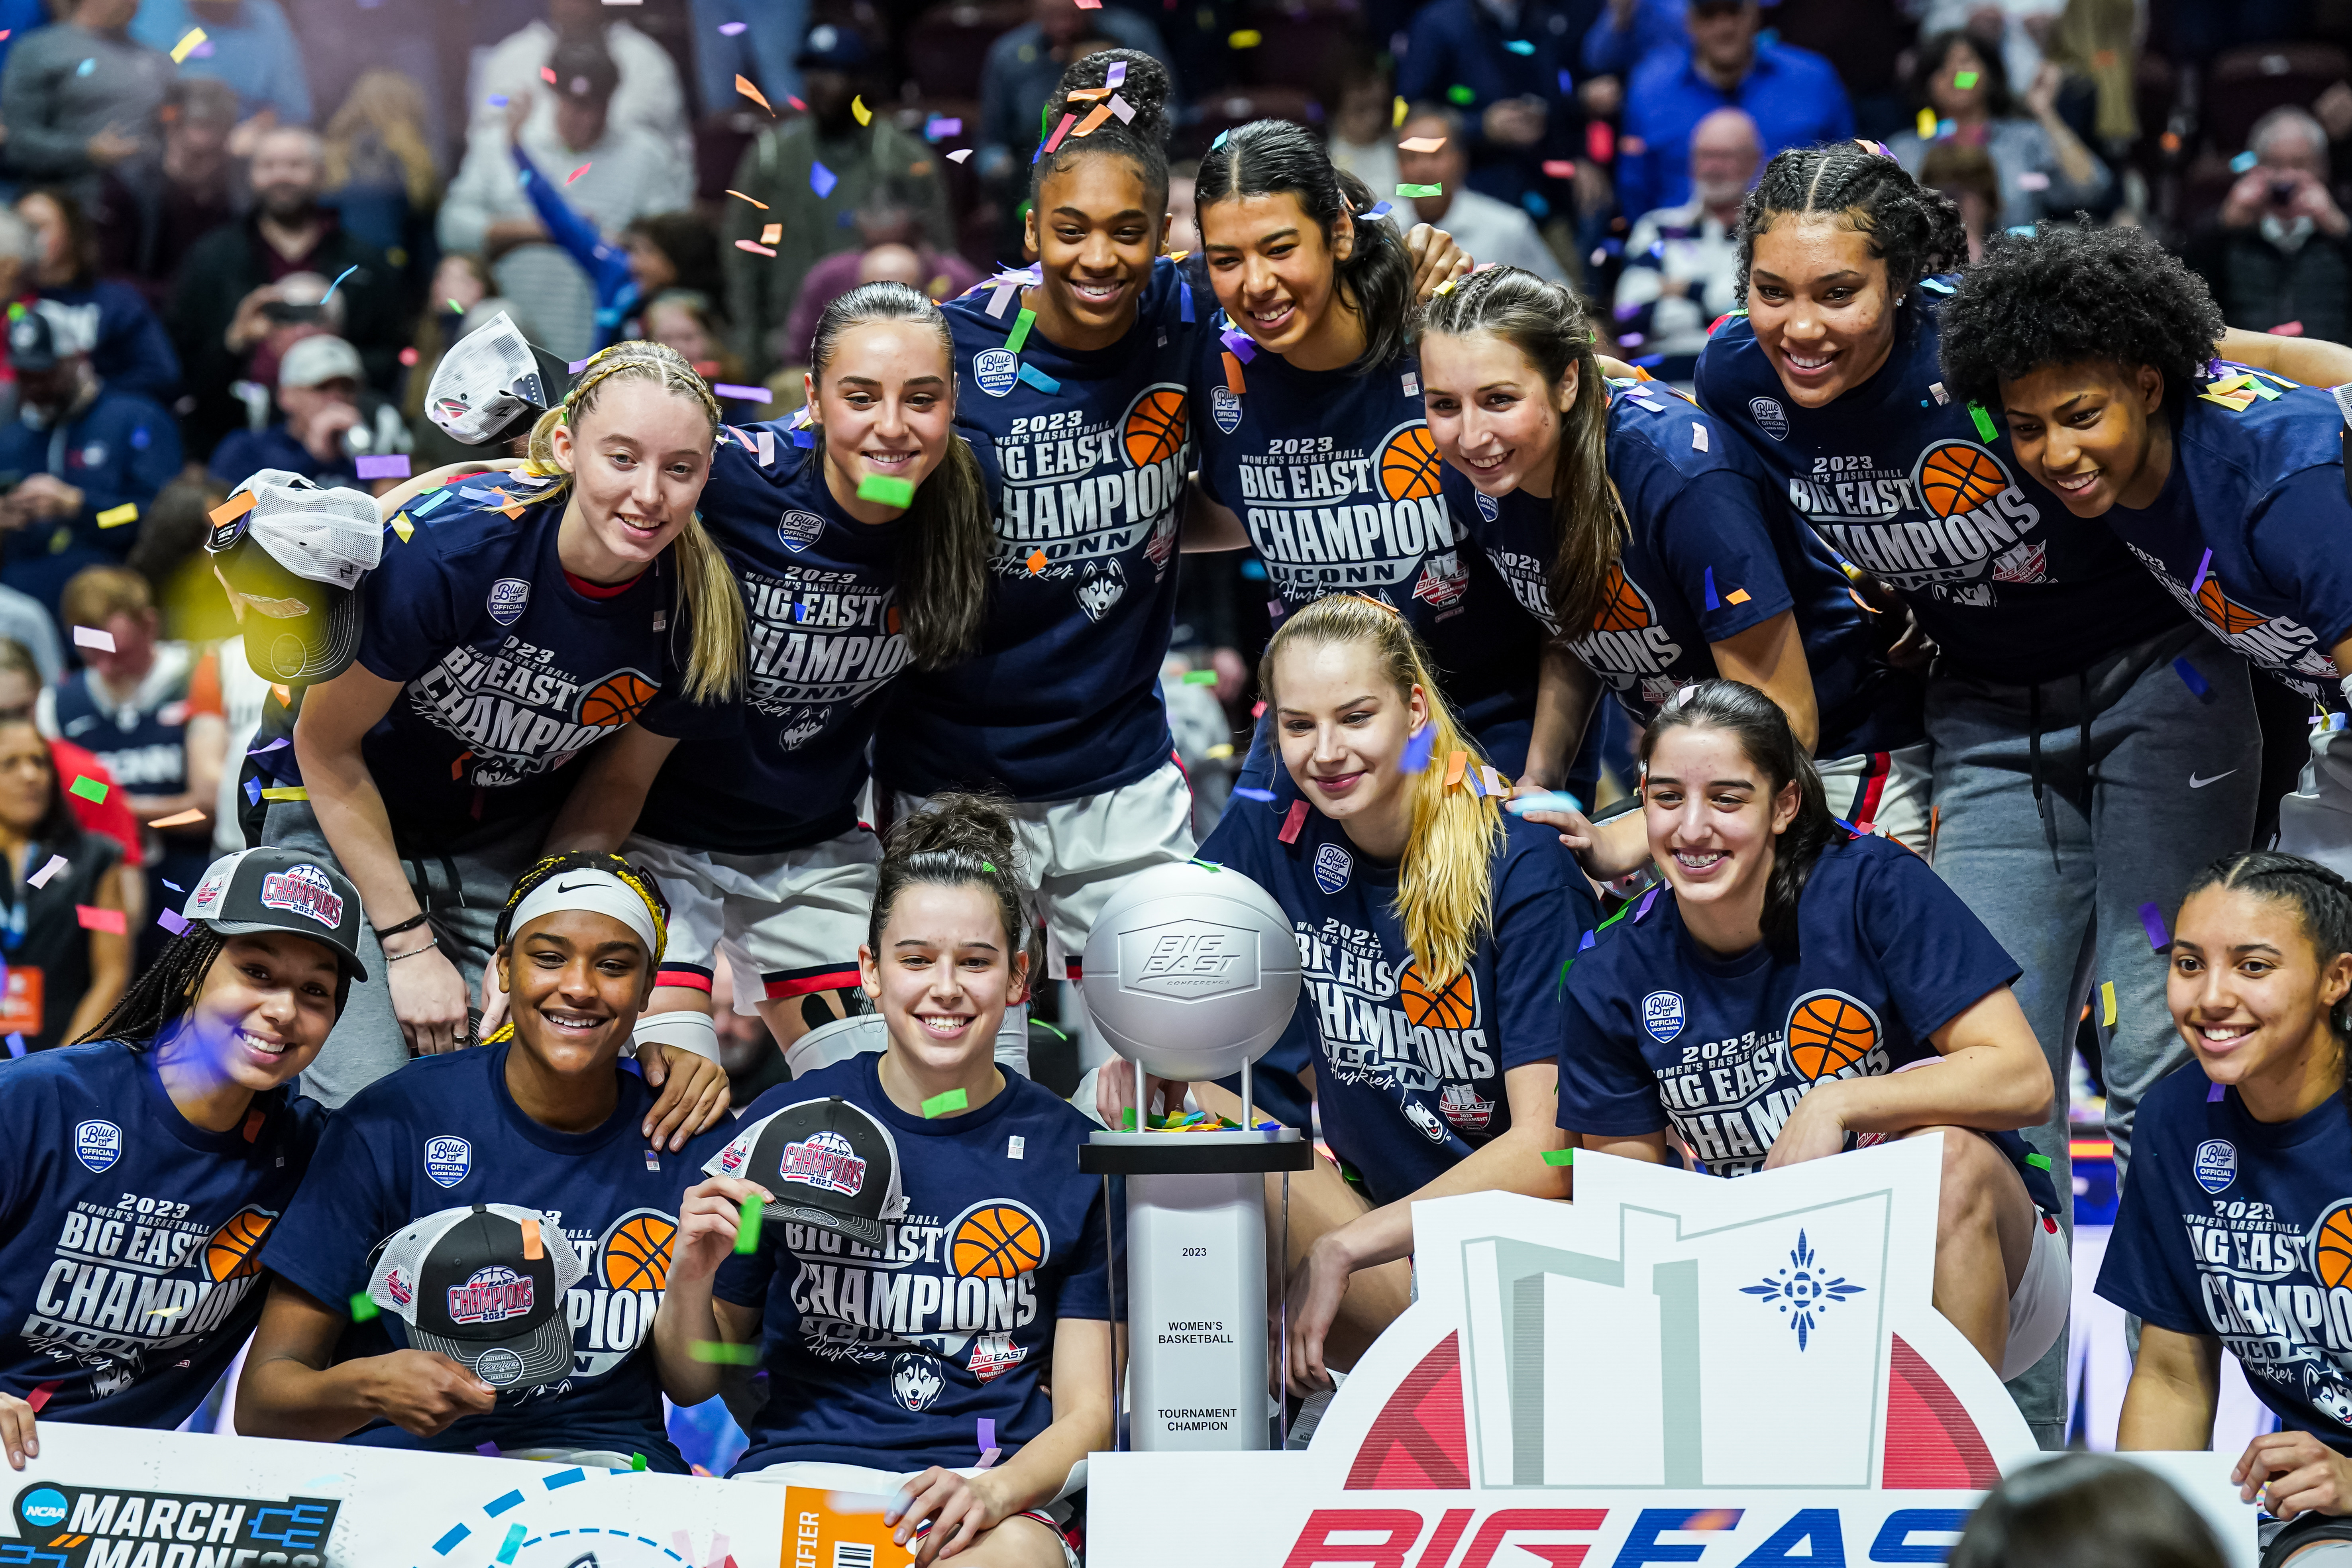 The UConn Huskies pose for a photo after defeating the Villanova Wildcats in the Big East Conference Tournament Championship at Mohegan Sun Arena.